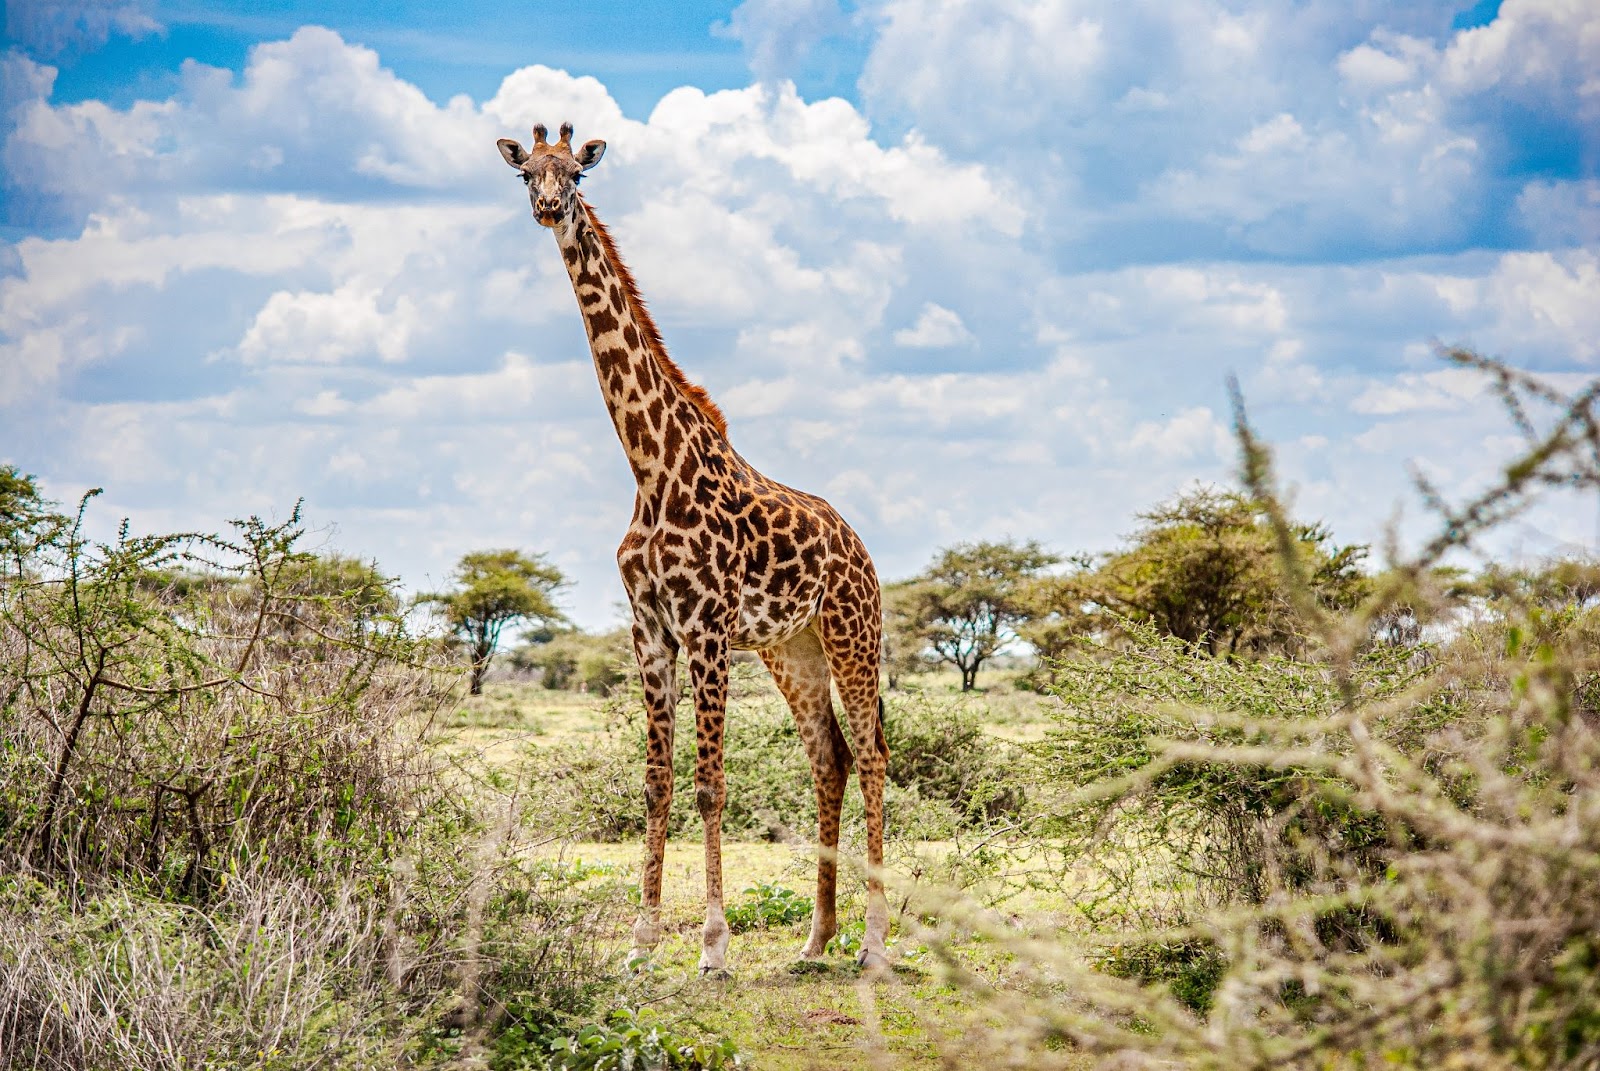 The Serengeti, Tanzania - 23 Top Sights to See Before You Die 